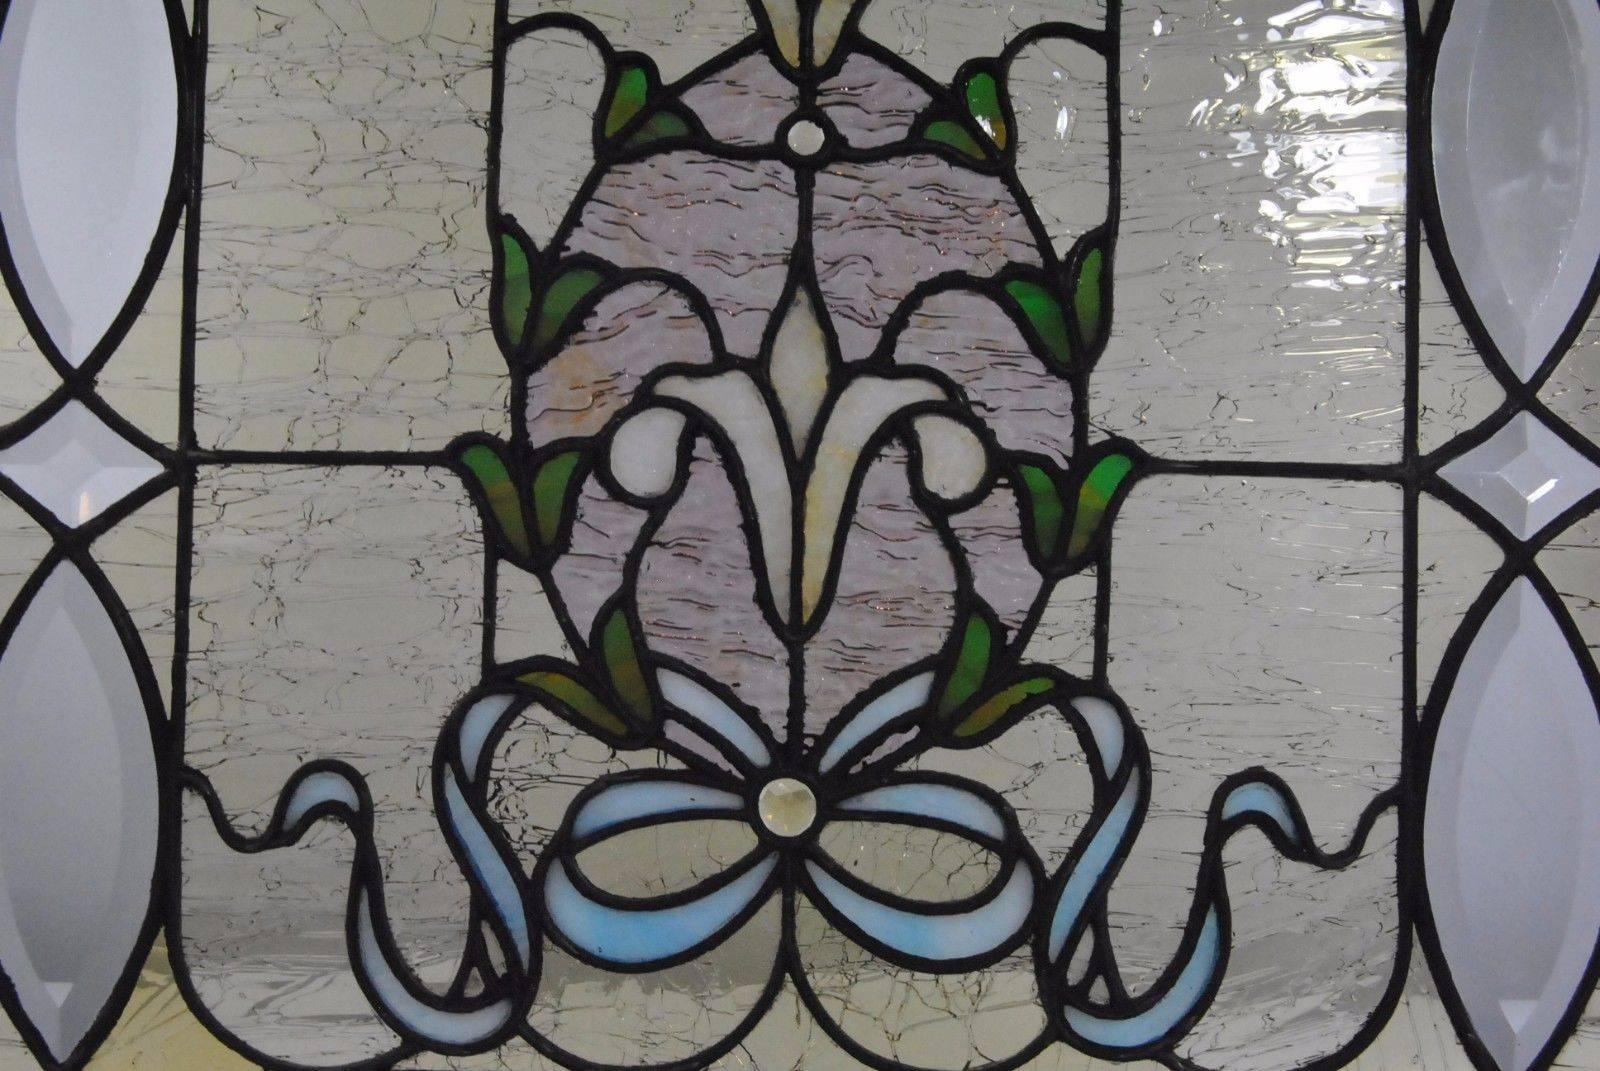 Antique stained glass and beveled cut window. Fine leadwork. Center design features a flowing blue ribbon and bow with jewel accents. Suspended tulips surrounded by bell flowers. Border has beveled cut-glass details. Measures: There are two small